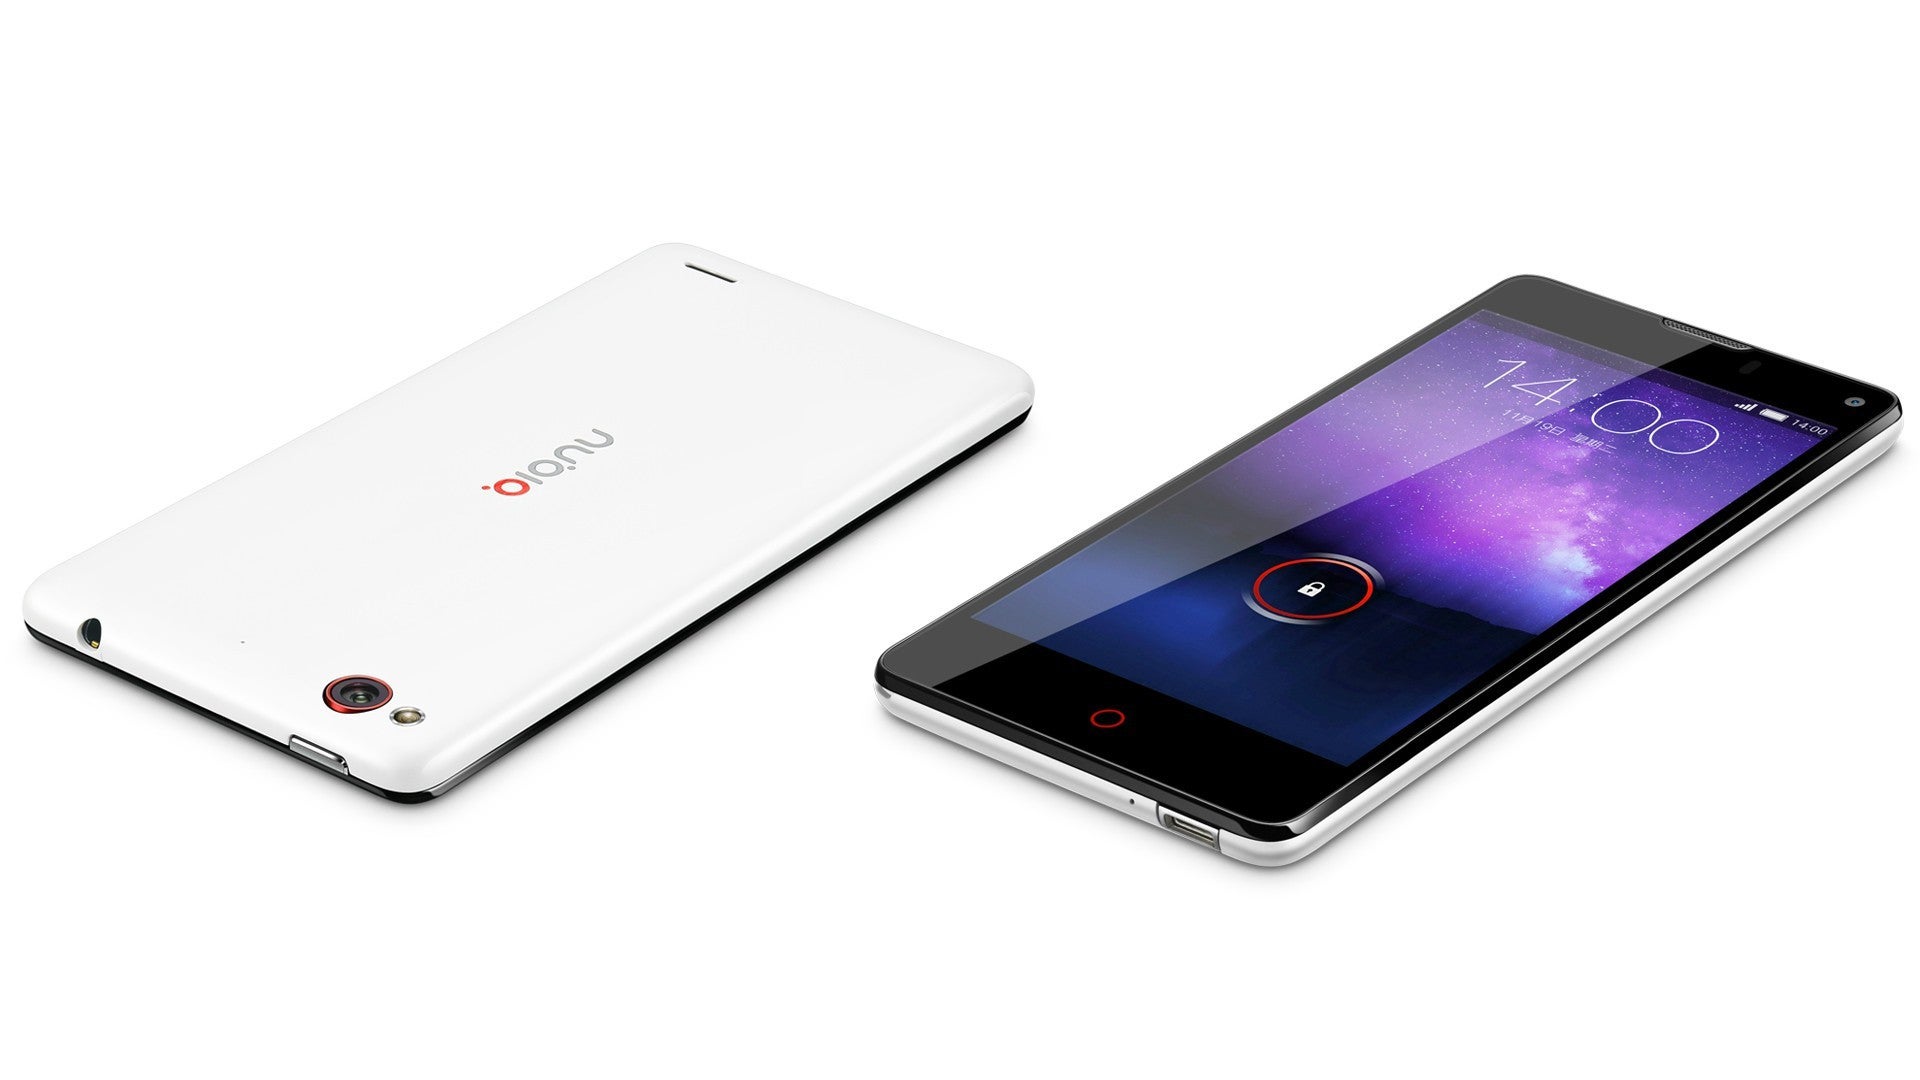 ZTE's Nubia Z5S and Z5S mini attract a record 2.5 million pre-orders in its homeland